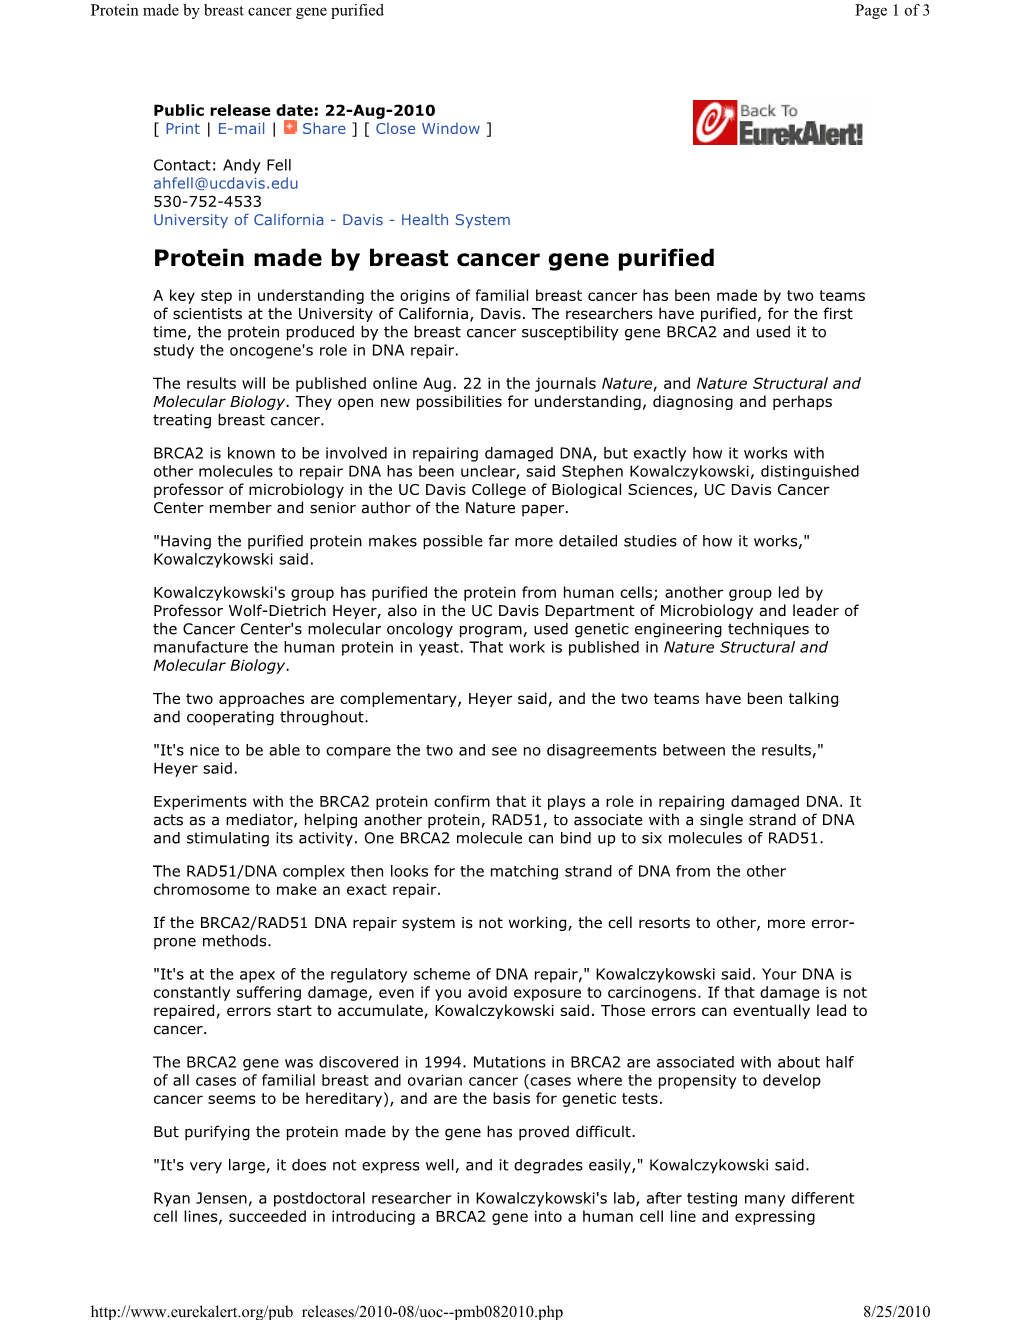 Protein Made by Breast Cancer Gene Purified Page 1 of 3